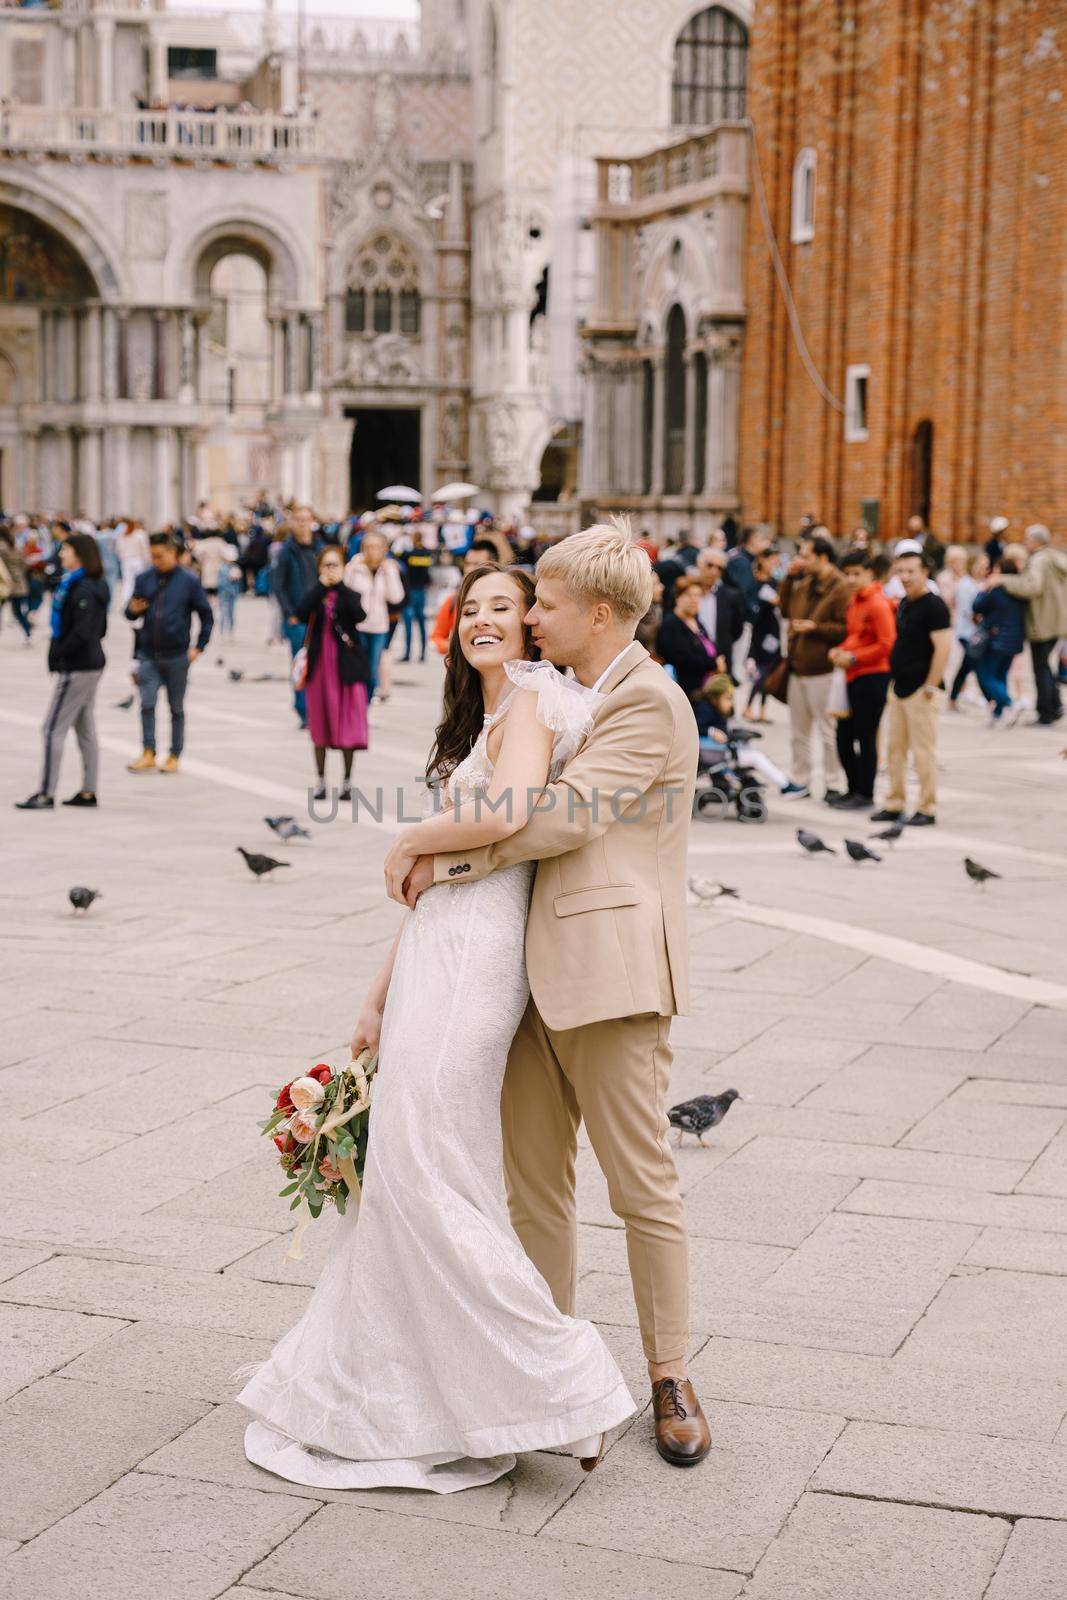 Venice, Italy - 04 october 2019: Wedding in Venice, Italy. The bride and groom are hugging in Piazza San Marco, overlooking Campanila and St. Mark Cathedral, among a crowd of tourists. by Nadtochiy